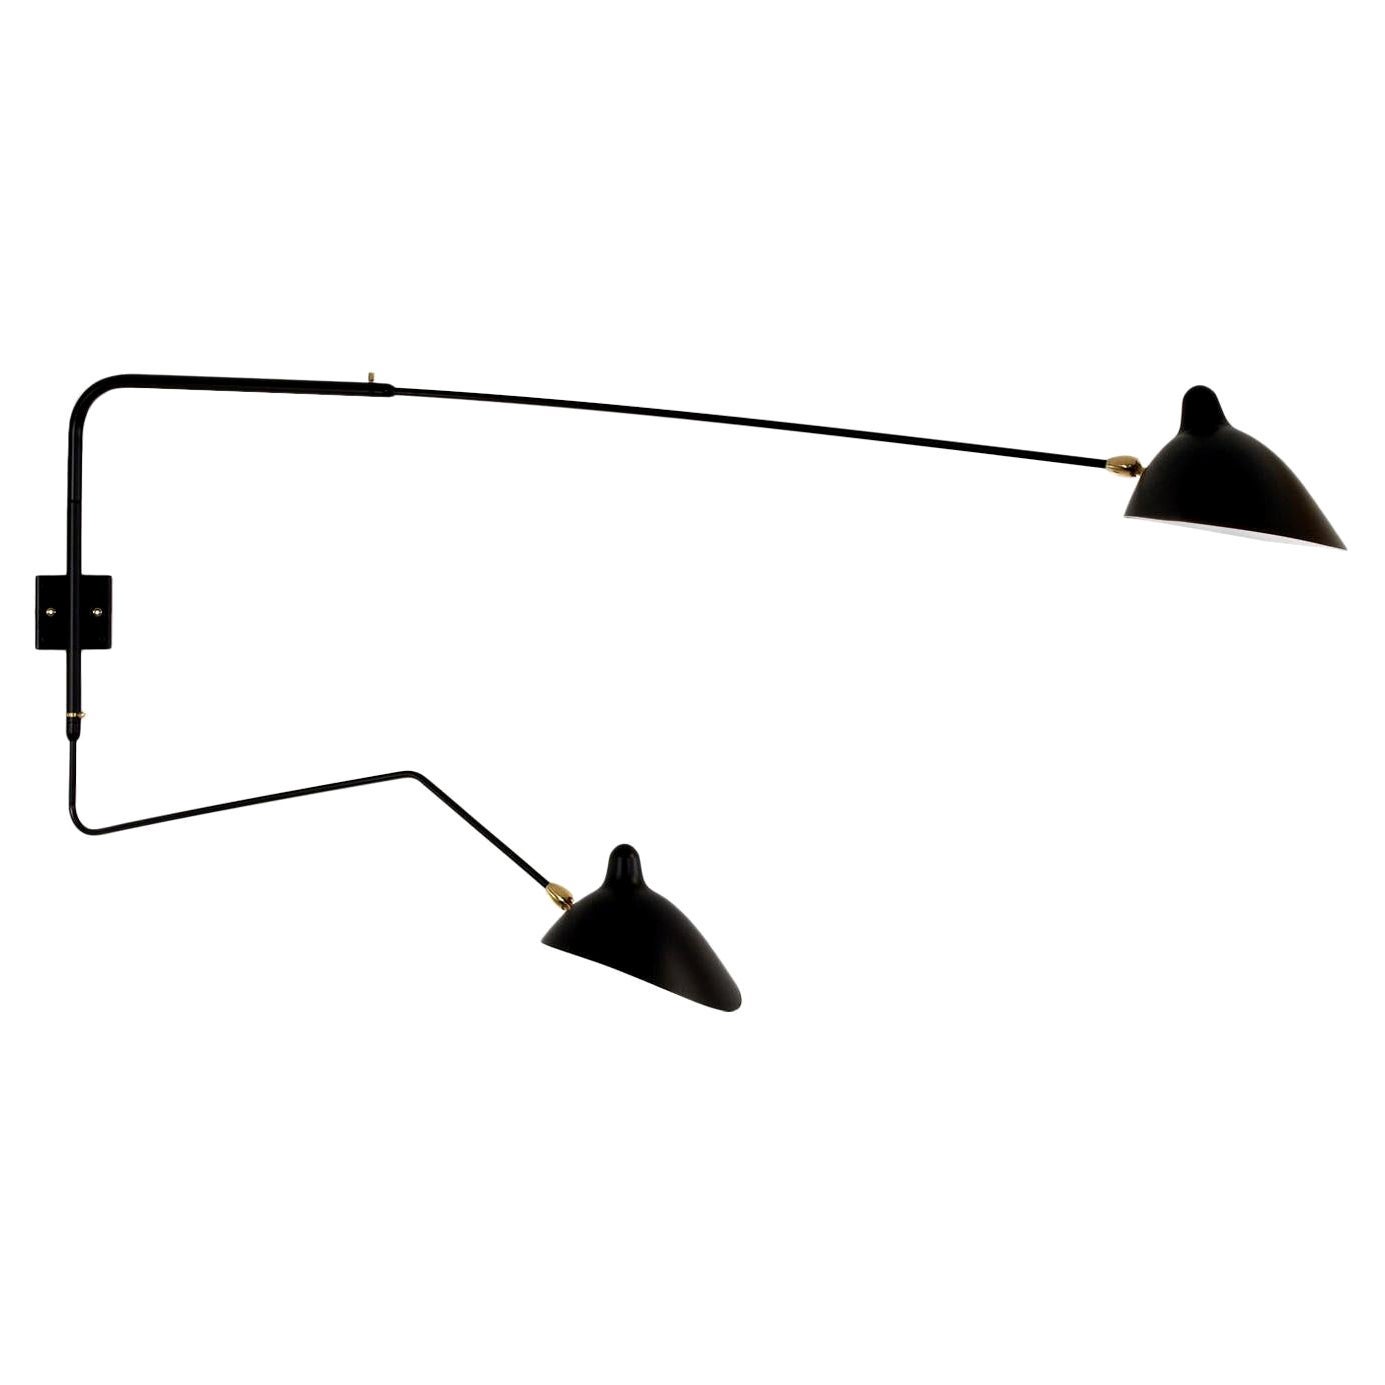 Serge Mouille Modern Black Two Rotating Straight-Curved Arms Wall Lamp For Sale